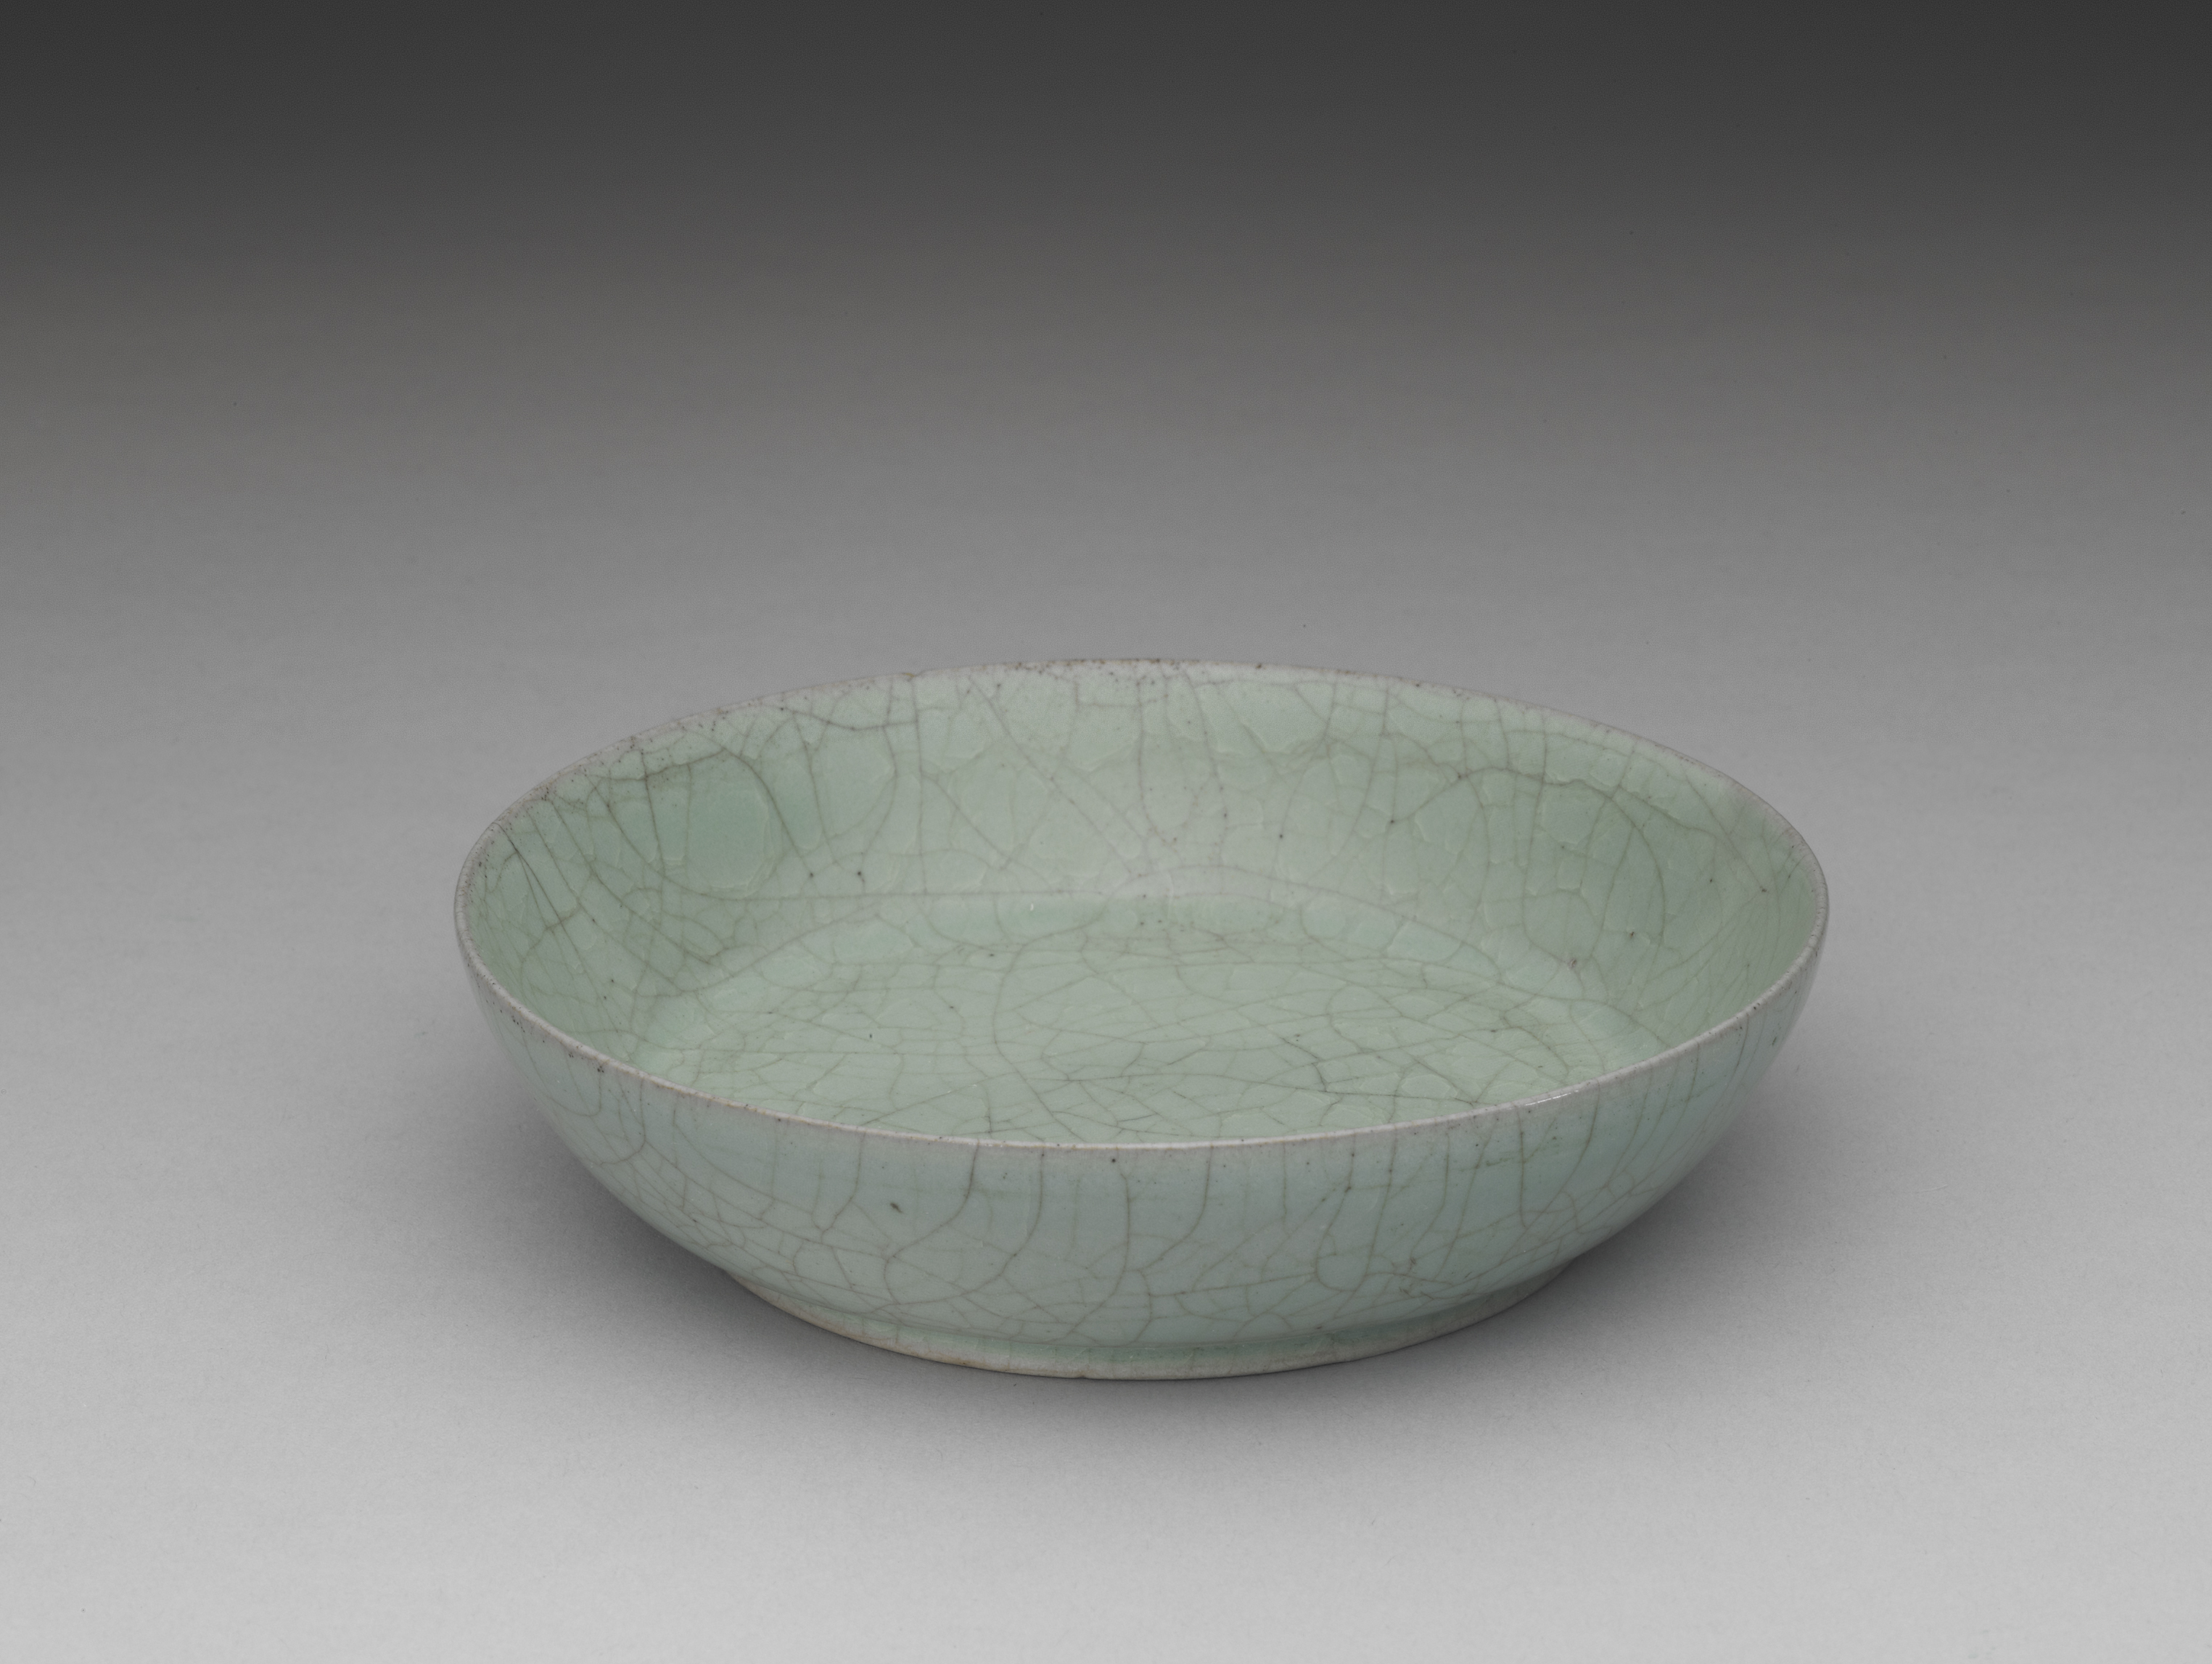 Dish with celadon glaze
Ru ware, Northern Song dynasty, late 11th- early 12th century
